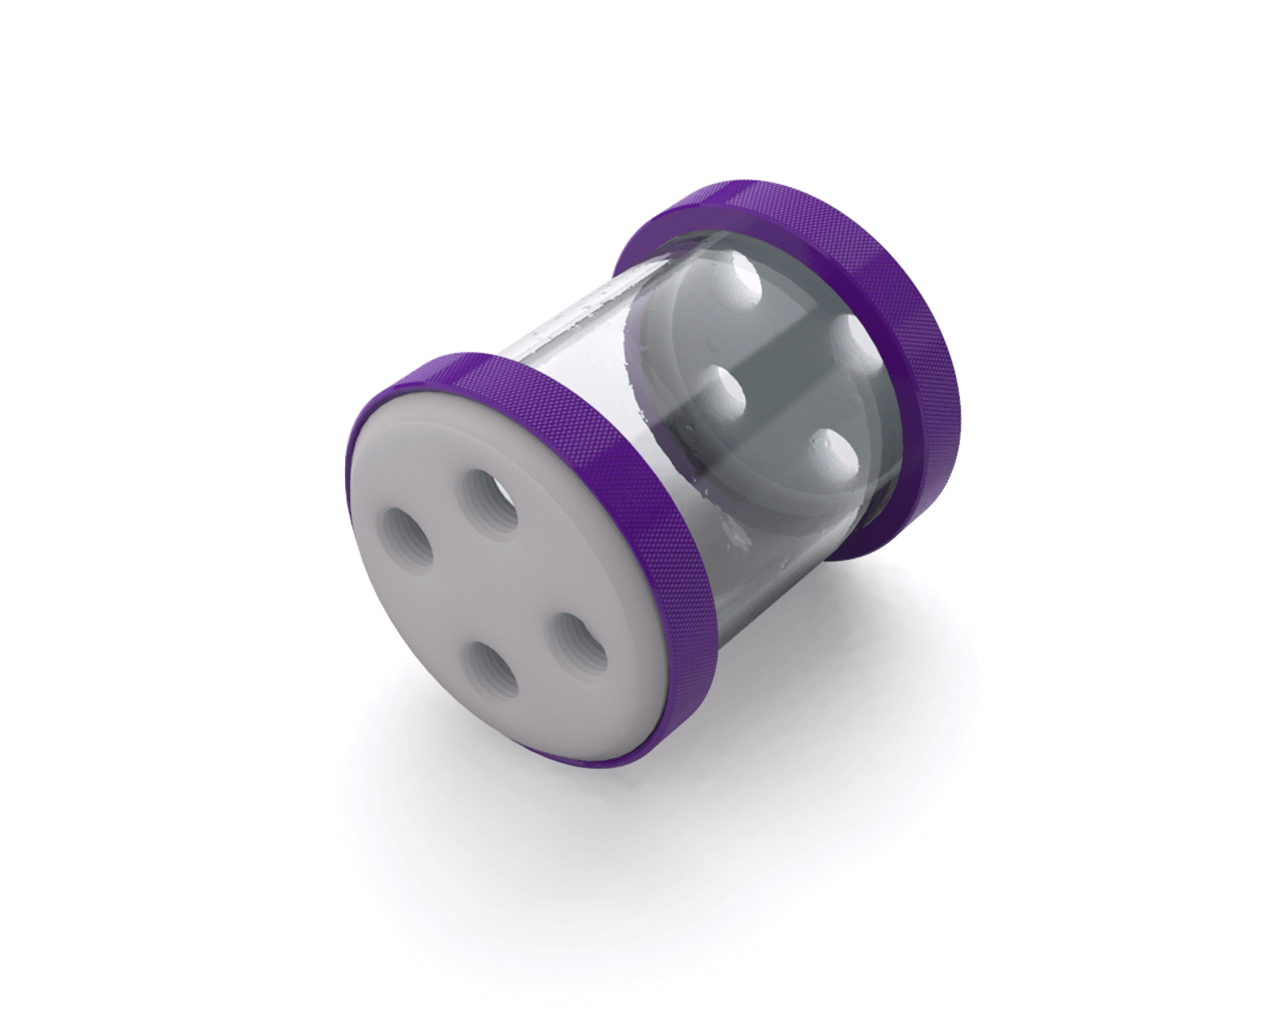 PrimoChill CTR Low Profile Phase II Reservoir - White POM - 80mm - PrimoChill - KEEPING IT COOL Purple